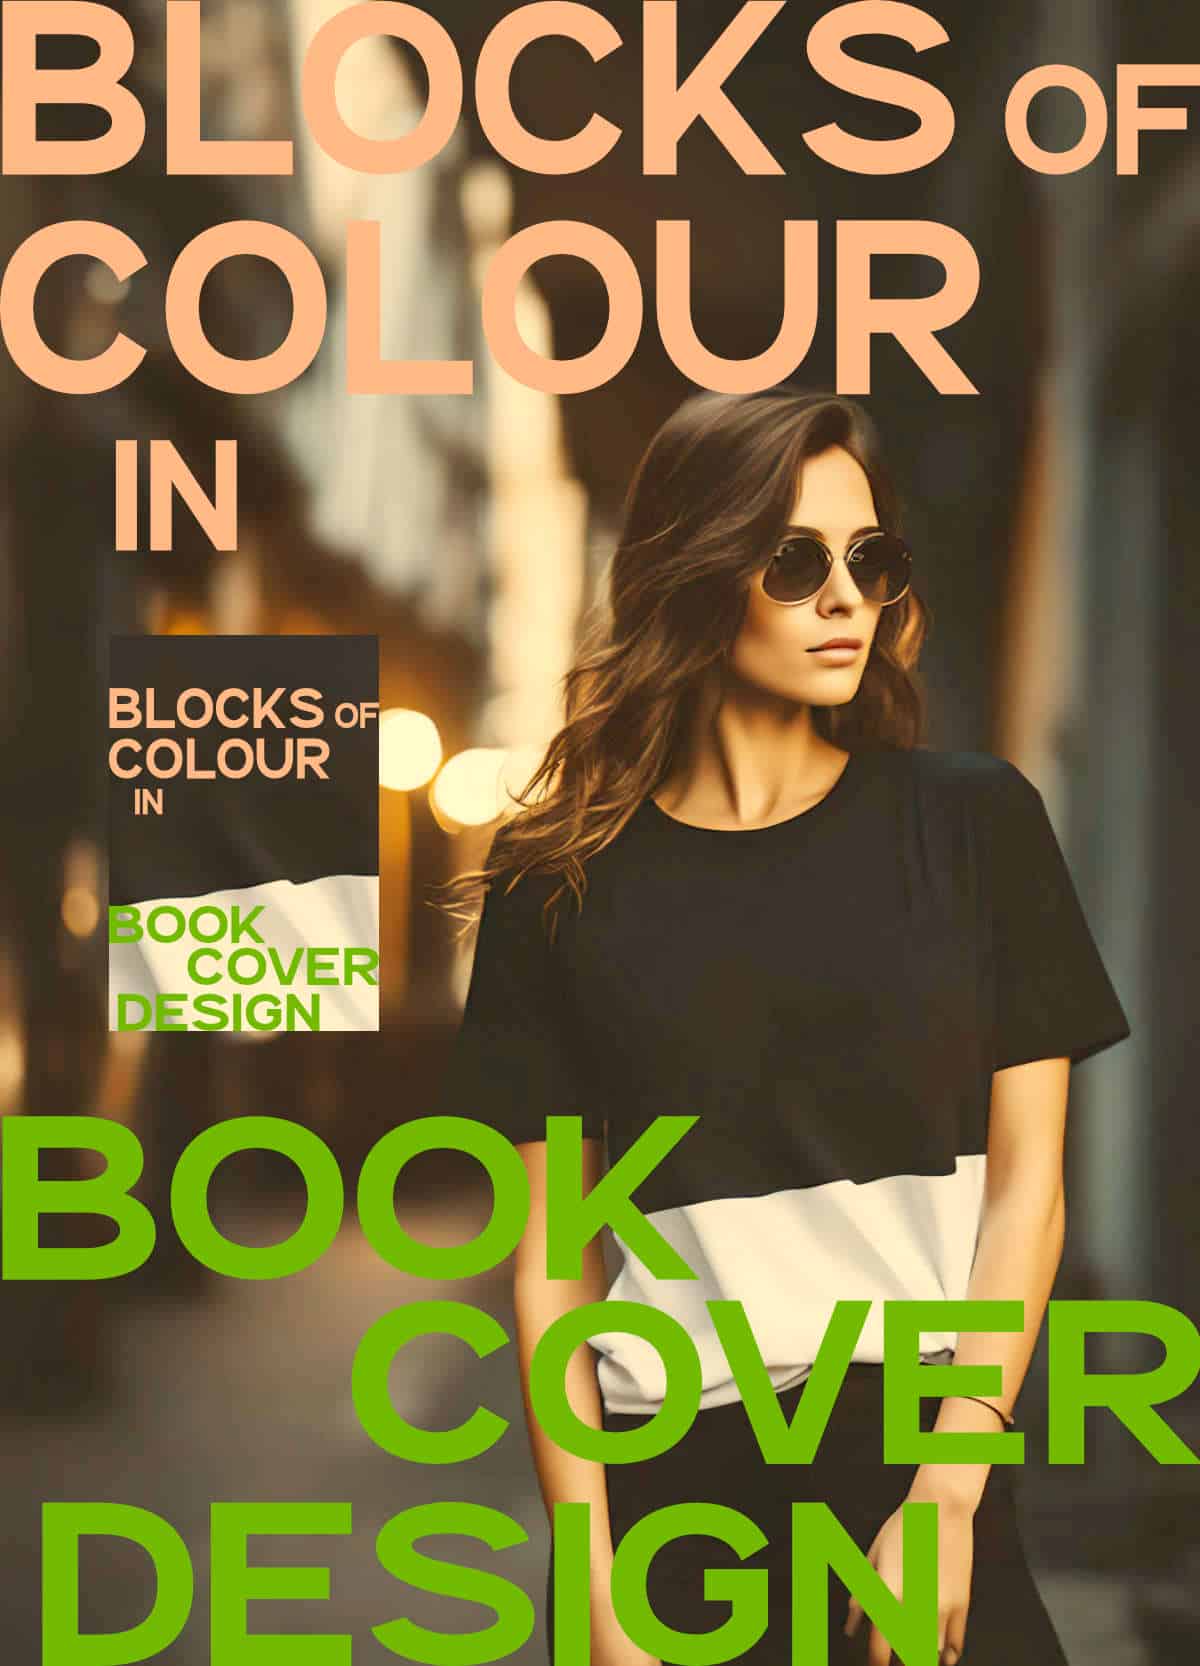 Large Blocks of Colour in Book Cover Design